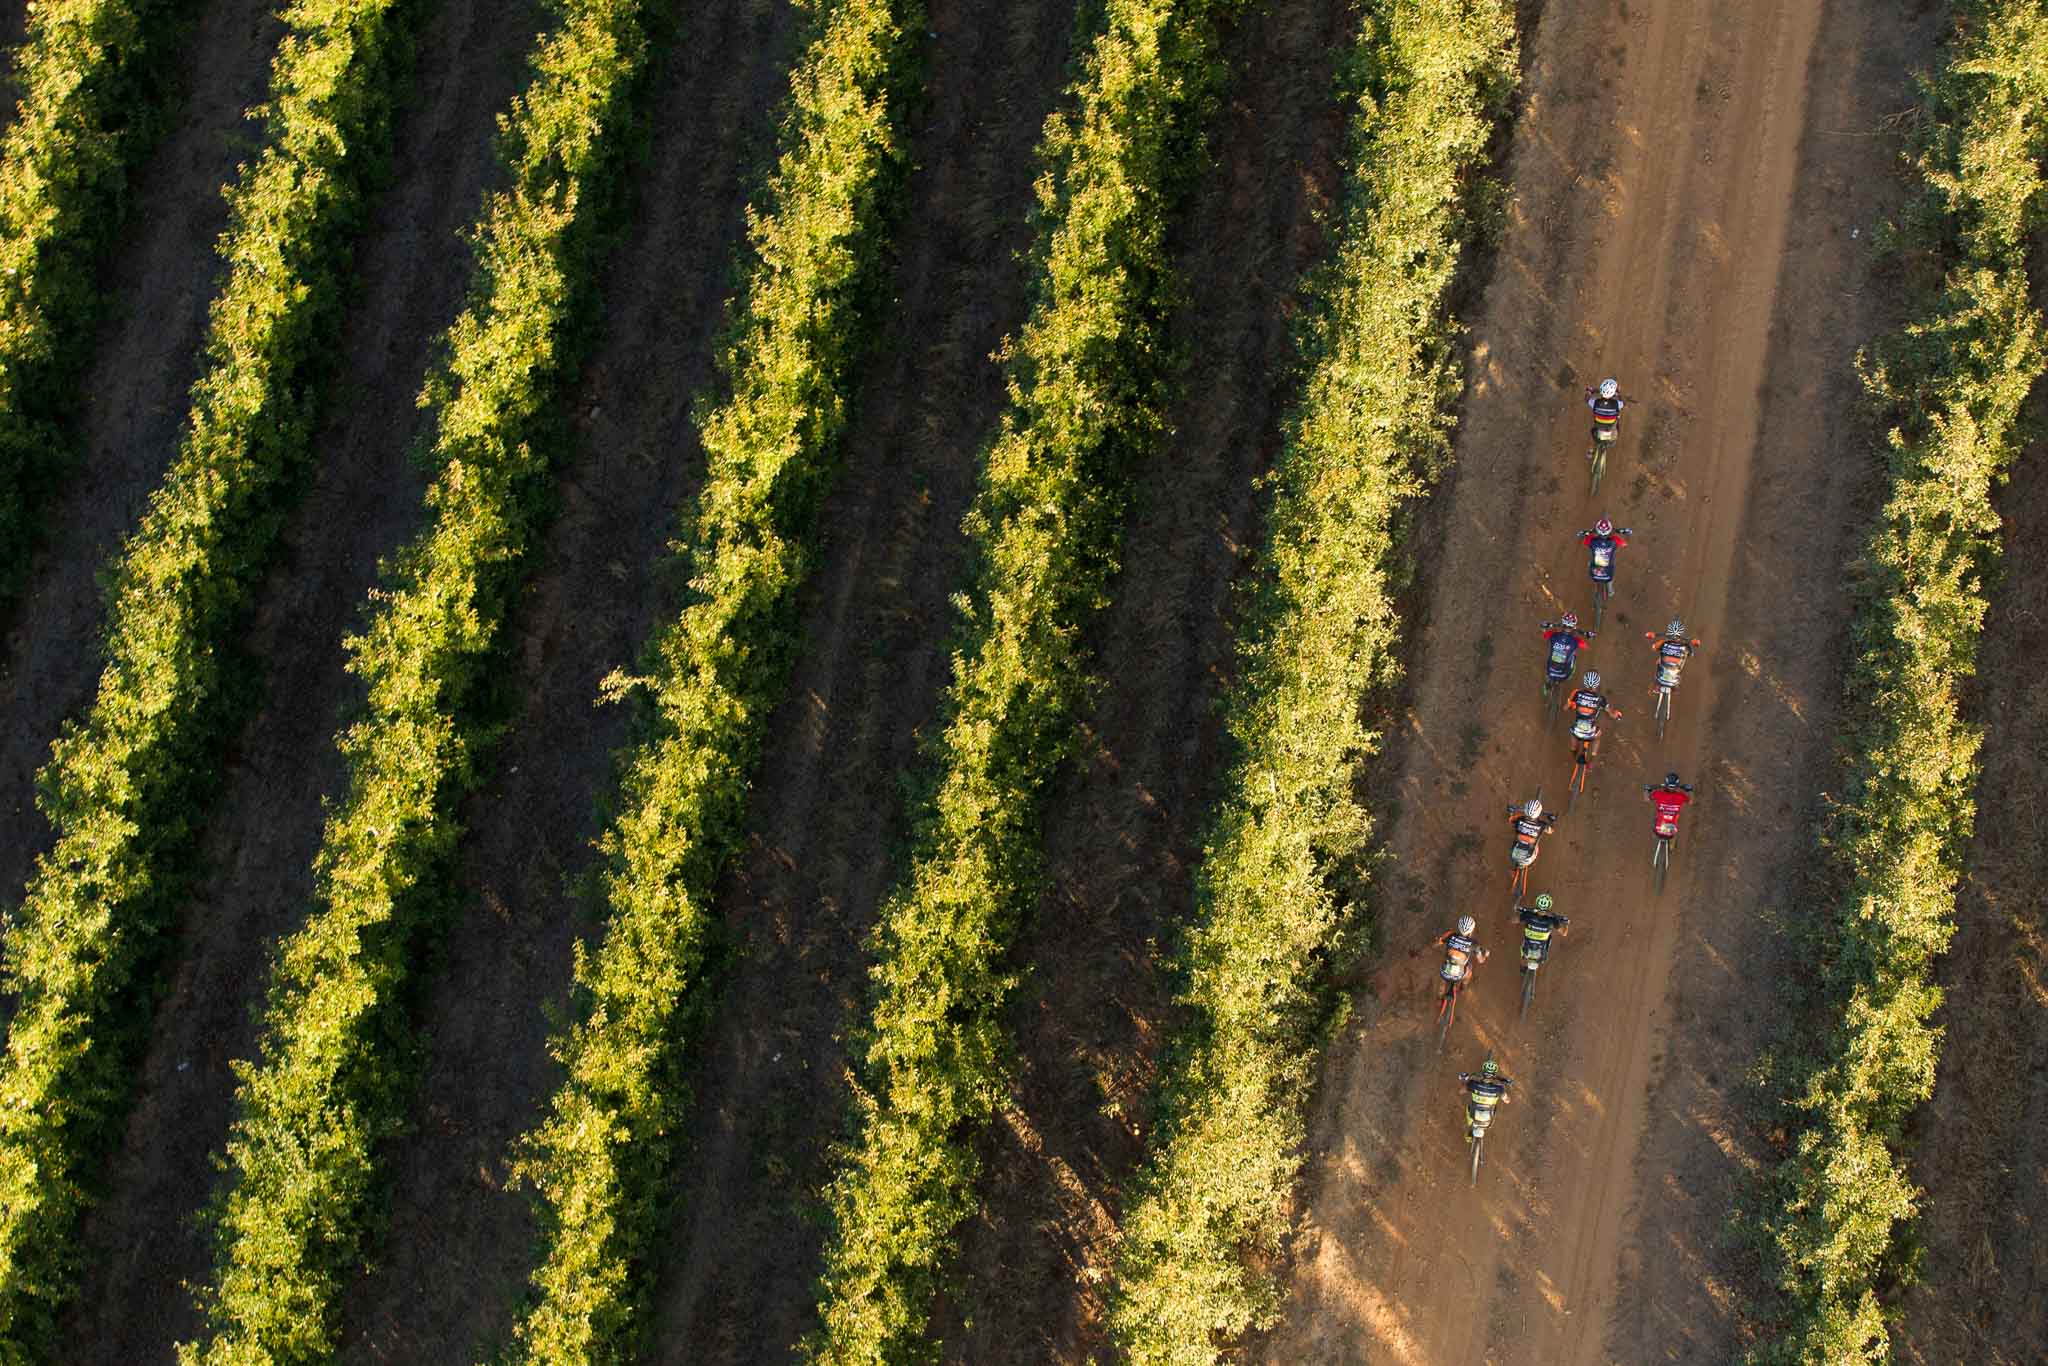 Riders during stage 1 of the 2016 Absa Cape Epic Mountain Bike stage race held from Saronsberg Wine Estate in Tulbagh, South Africa on the 14th March 2016 Photo by Gary Perkin/Cape Epic/SPORTZPICS PLEASE ENSURE THE APPROPRIATE CREDIT IS GIVEN TO THE PHOTOGRAPHER AND SPORTZPICS ALONG WITH THE ABSA CAPE EPIC {ace2016}